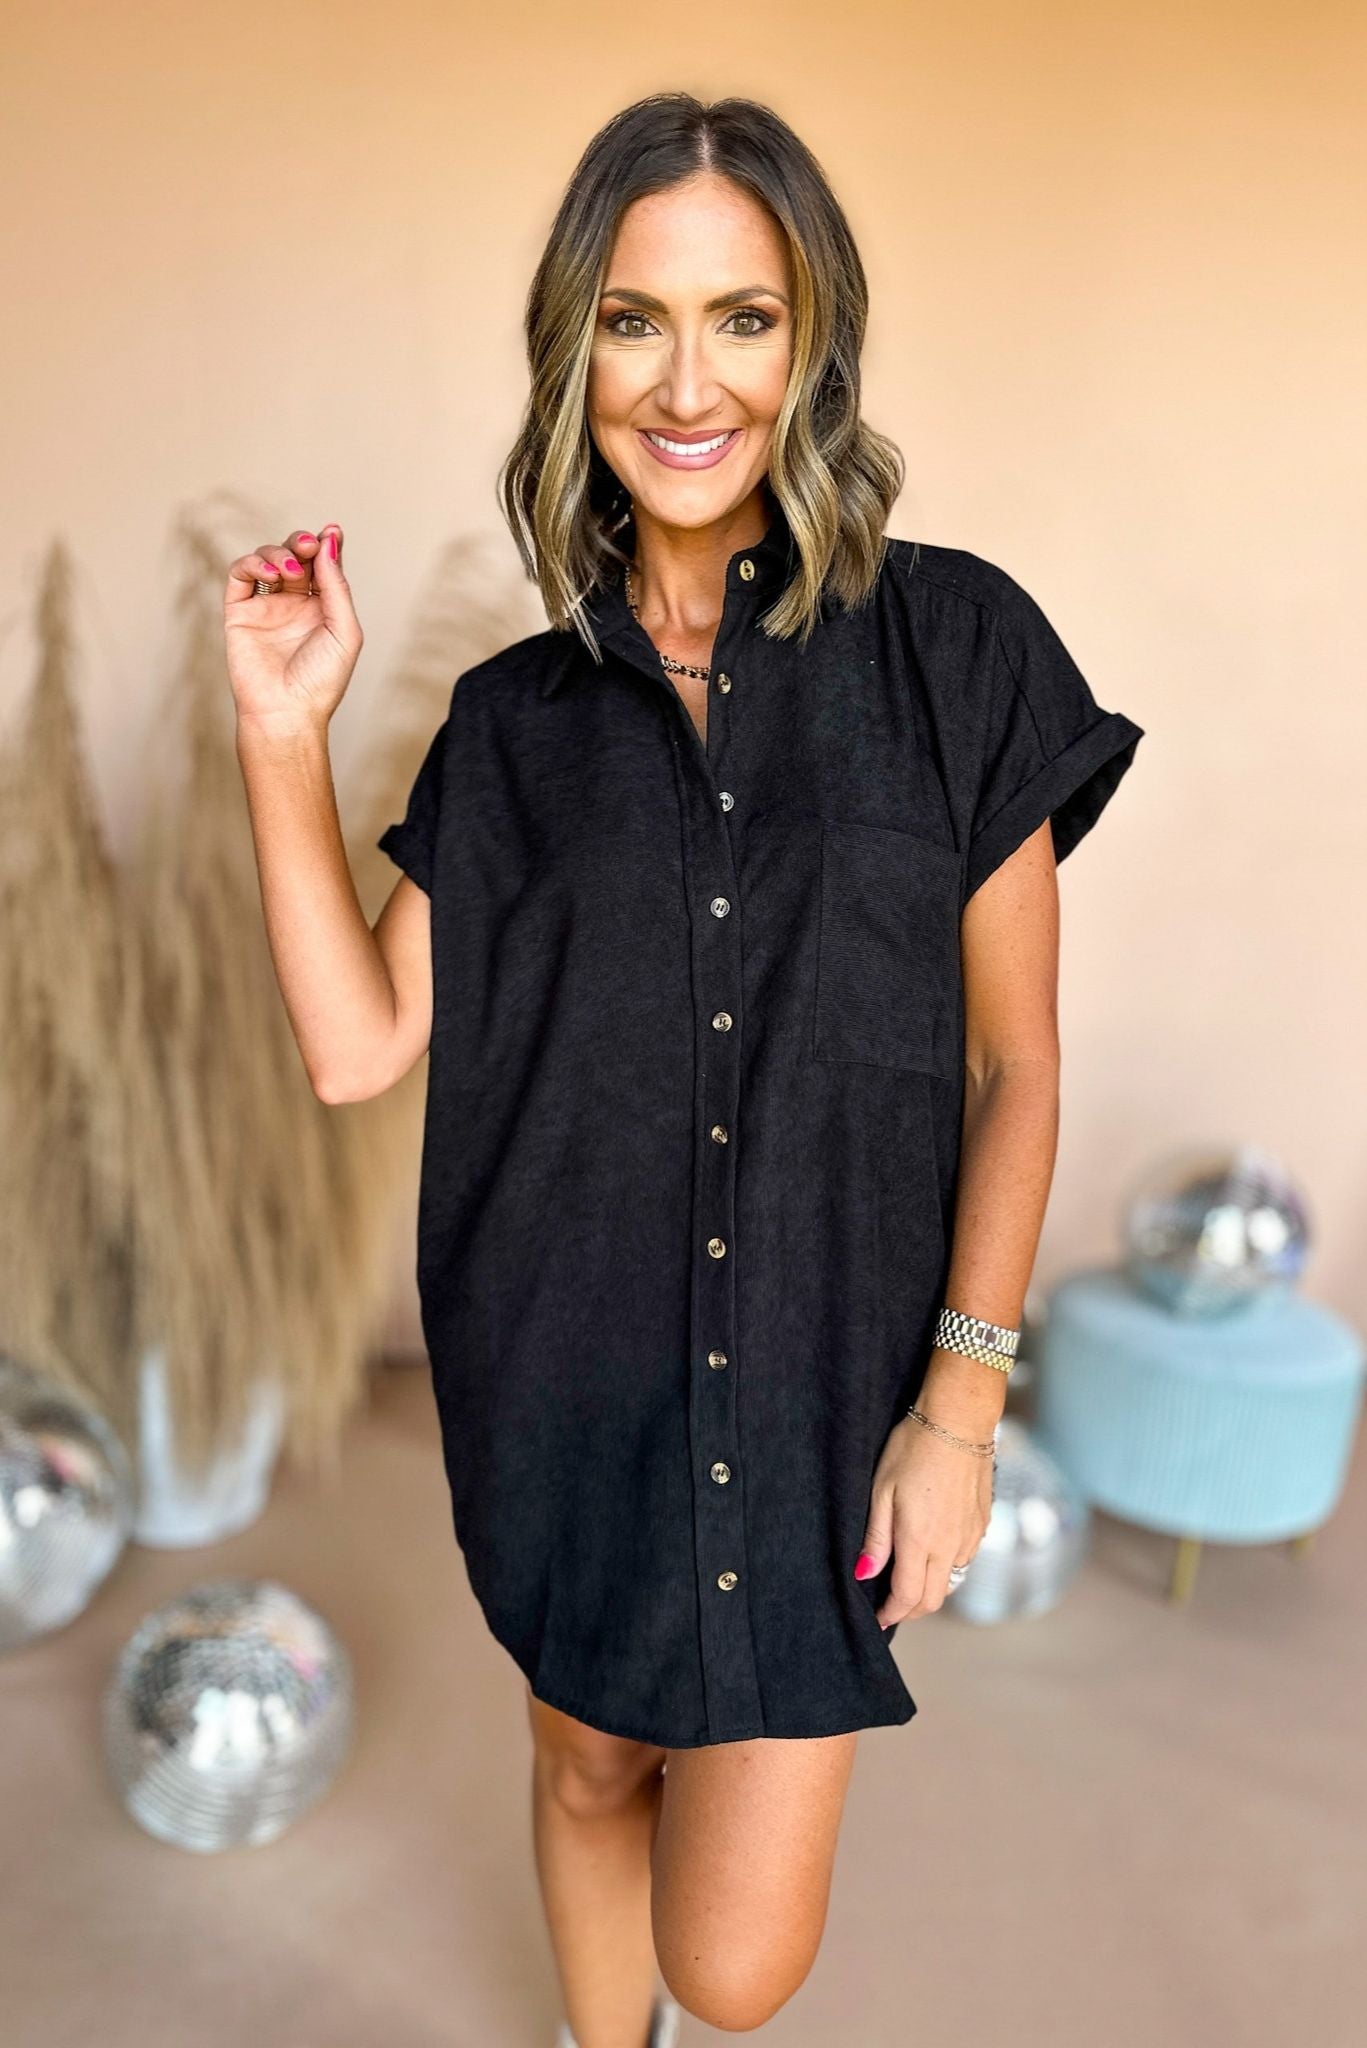 Load image into Gallery viewer, Black Corduroy Pocket Detail Button Down Dress, mom style, mom chic, carpool chic, fall style, summer to fall, elevated style, must have dress, must have fall, shop style your senses by mallory fitzsimmons
